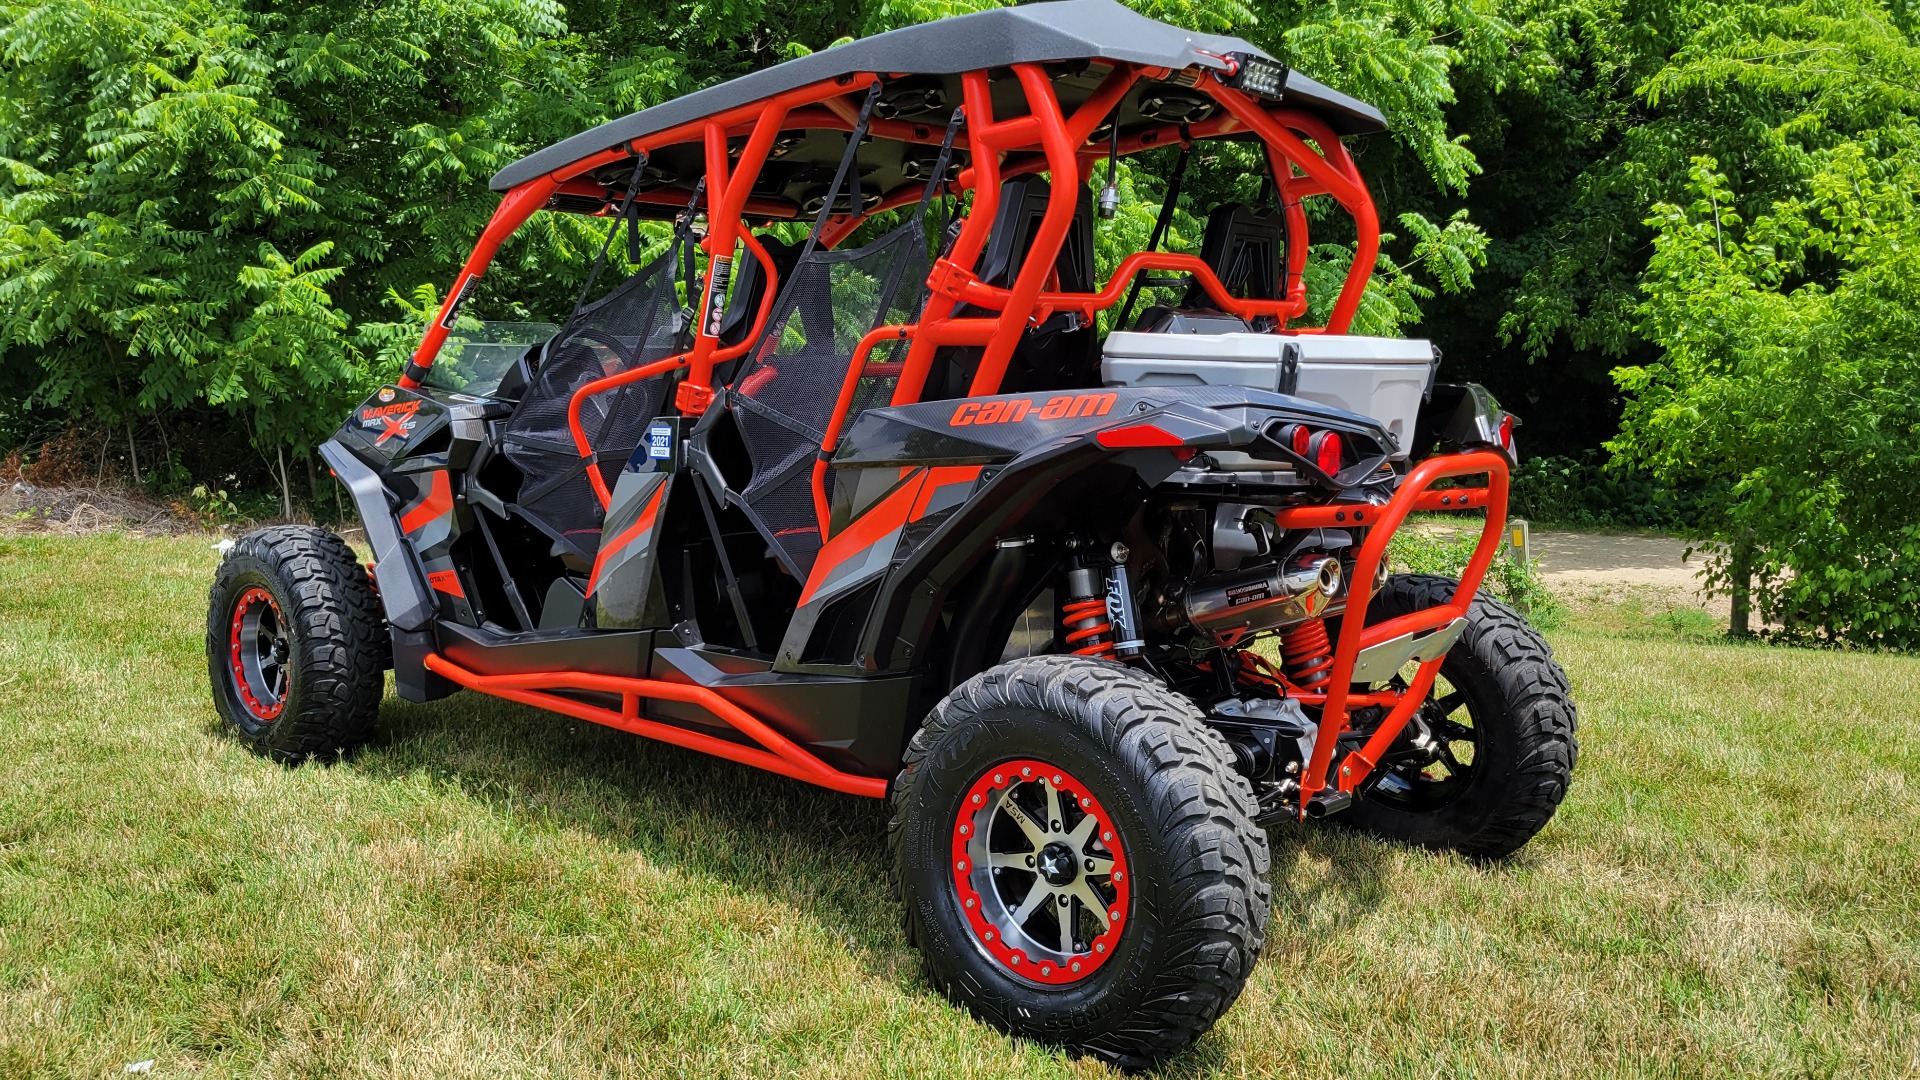 Used 2016 Can-Am MAVERICK MAX X-RS 1000R TURBO / 131HP / 4X4 / 4-SEATER / CUSTOM SOUND SYSTEM for sale $25,995 at Formula Imports in Charlotte NC 28227 3